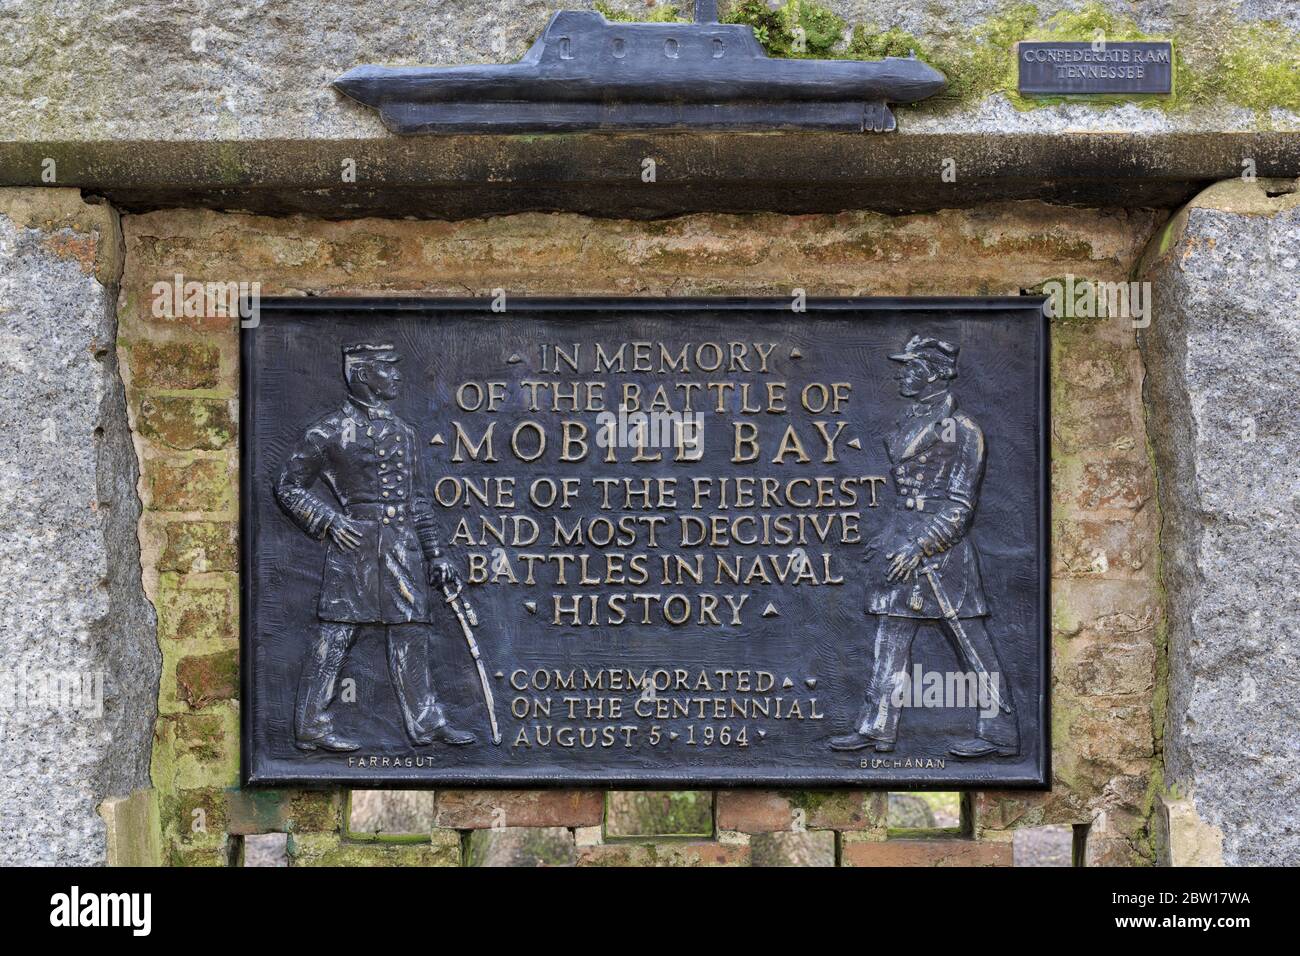 Battle of Mobile Bay Monument, Bienville Square, Mobile, Alabama, USA Stock Photo